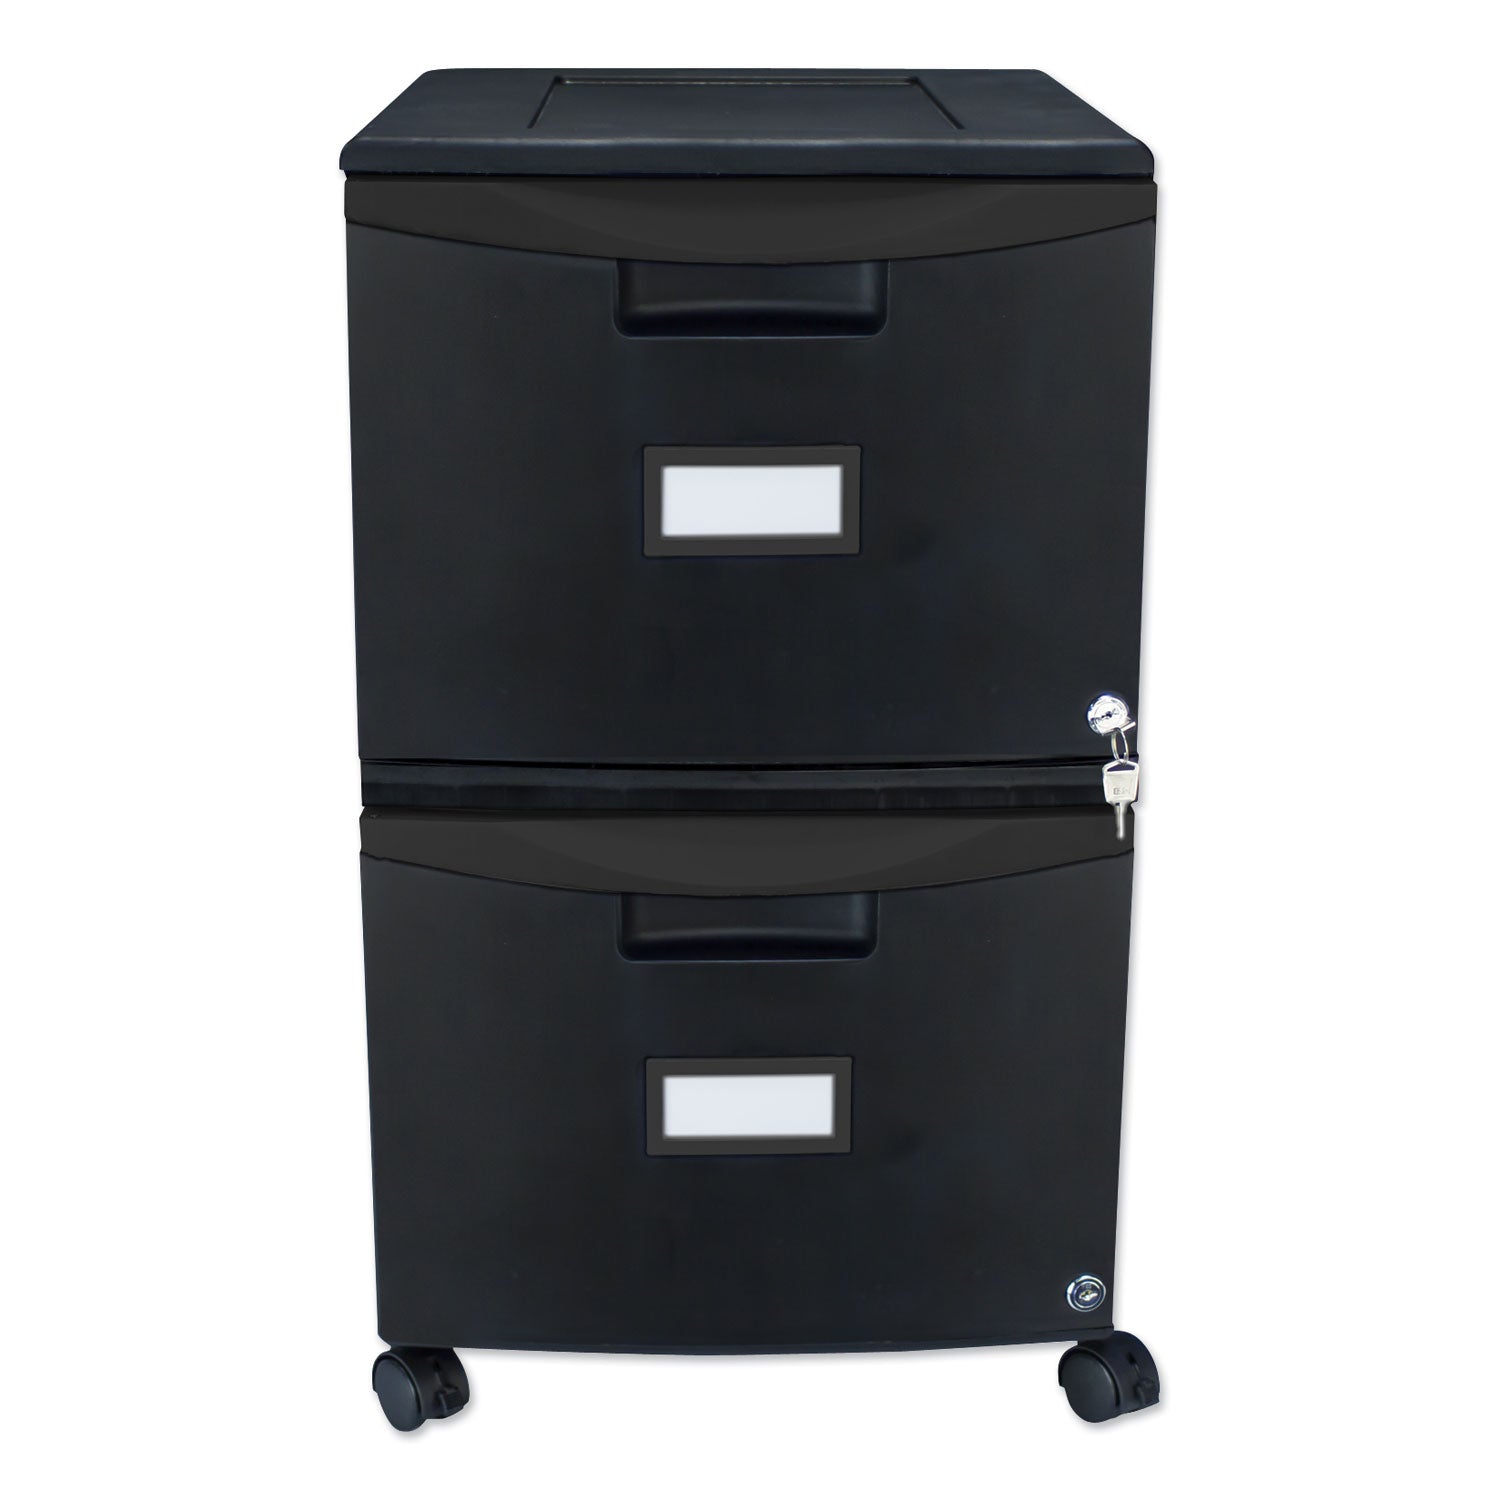 two-drawer-mobile-filing-cabinet-2-legal-letter-size-file-drawers-black-1475-x-1825-x-26_stx61312b01c - 1